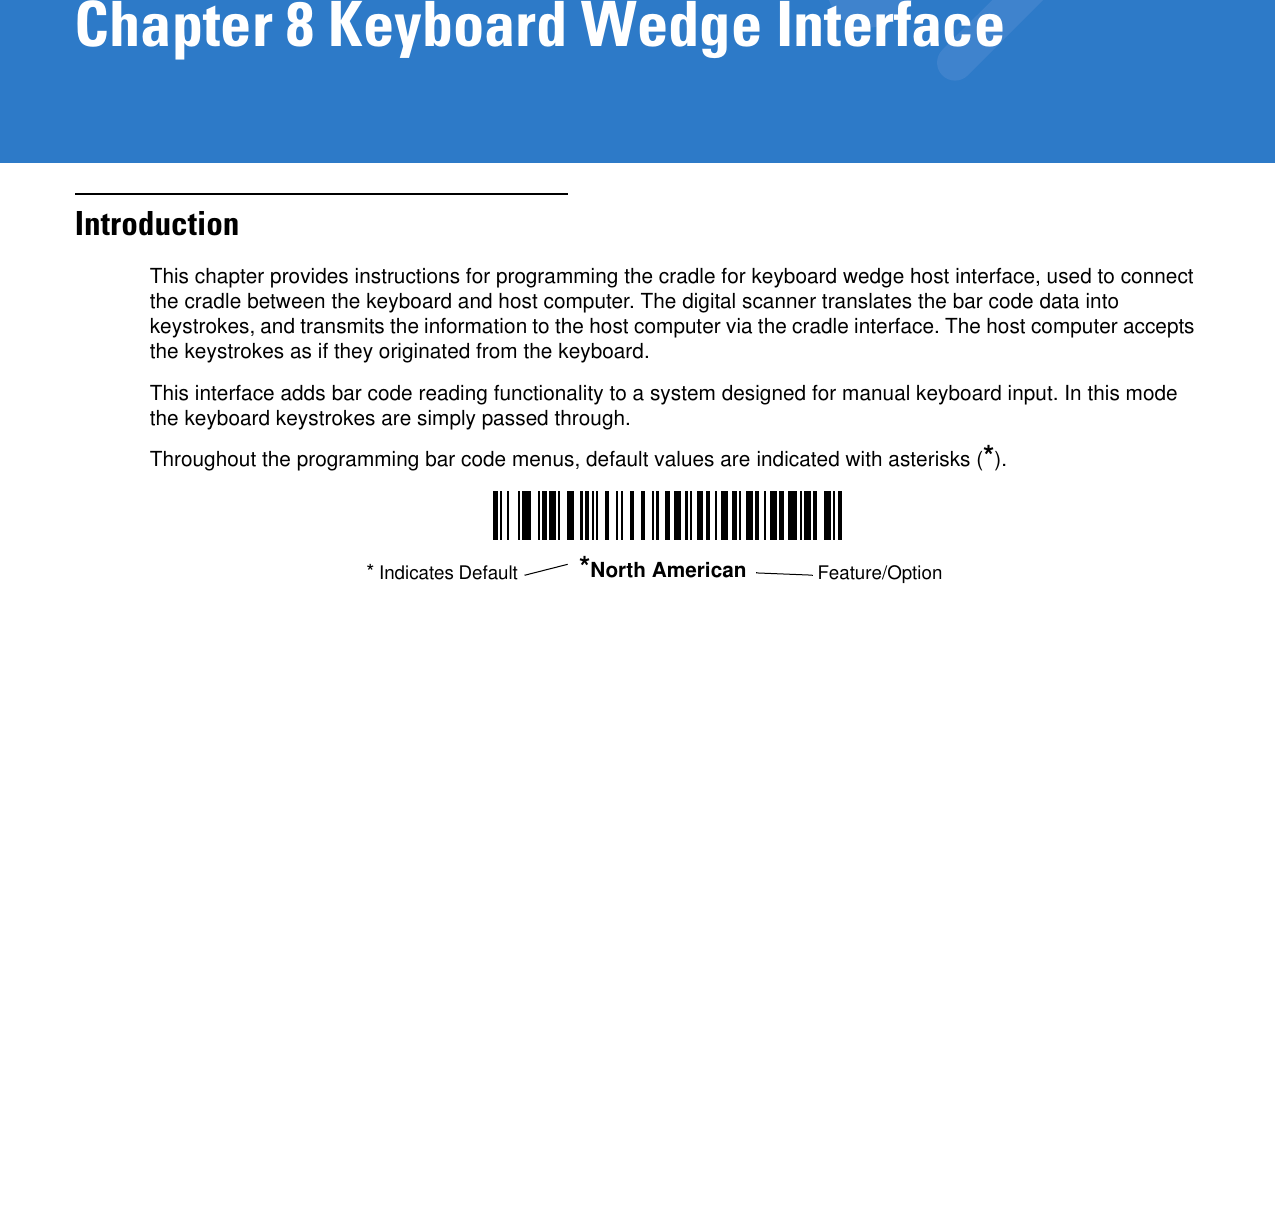 Chapter 8 Keyboard Wedge InterfaceIntroductionThis chapter provides instructions for programming the cradle for keyboard wedge host interface, used to connect the cradle between the keyboard and host computer. The digital scanner translates the bar code data into keystrokes, and transmits the information to the host computer via the cradle interface. The host computer accepts the keystrokes as if they originated from the keyboard.This interface adds bar code reading functionality to a system designed for manual keyboard input. In this mode the keyboard keystrokes are simply passed through.Throughout the programming bar code menus, default values are indicated with asterisks (*).*North American Feature/Option* Indicates Default